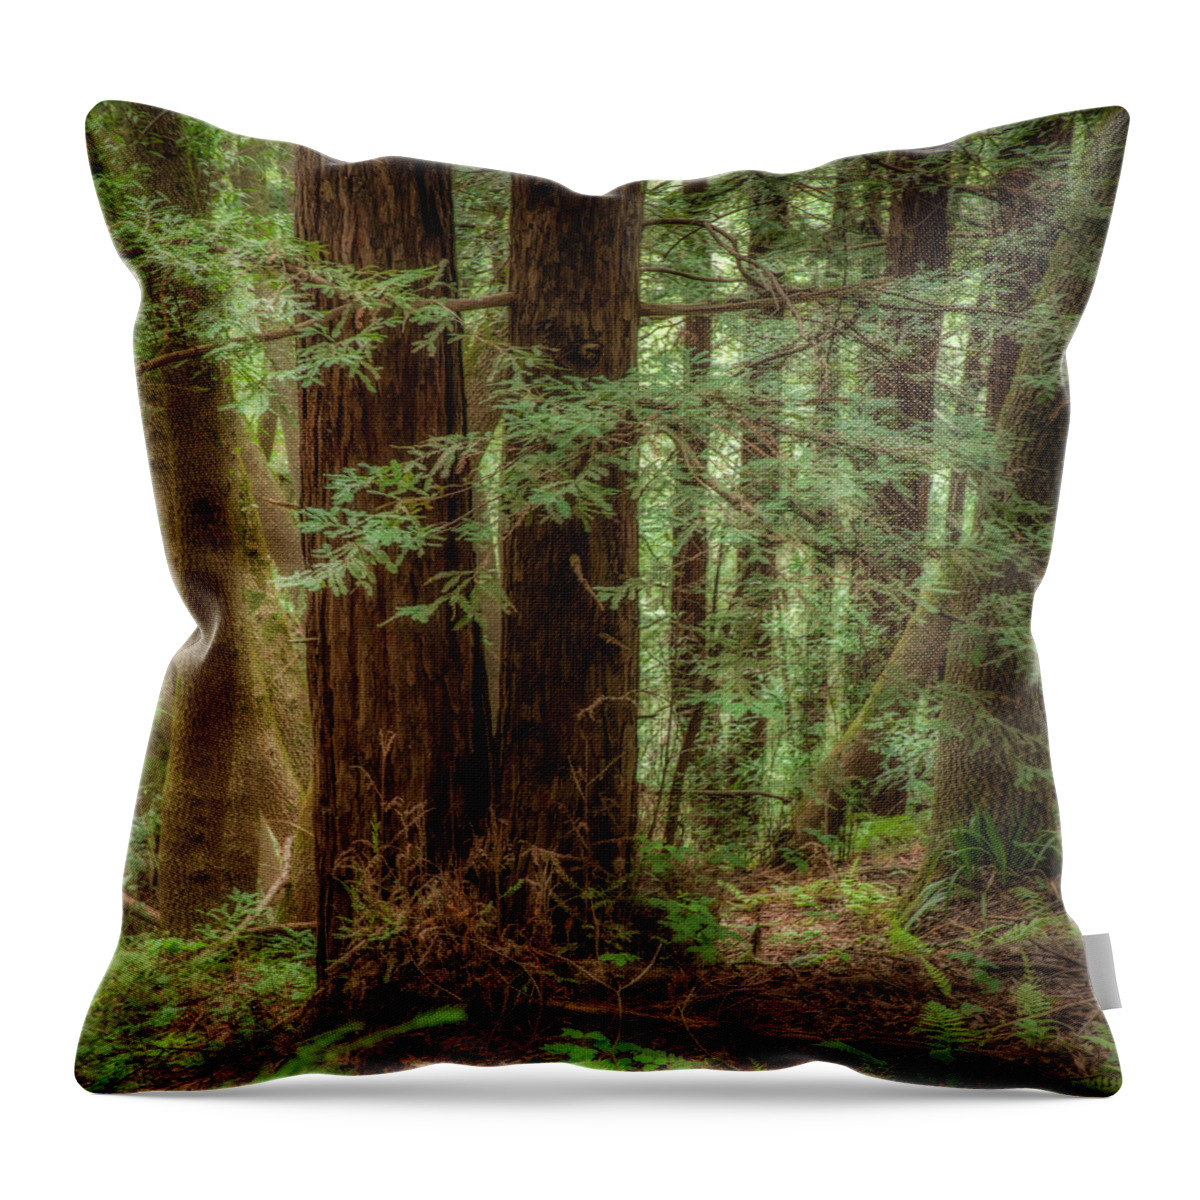 Redwoods Throw Pillow featuring the photograph Redwoods, Roy's Redwoods by Donald Kinney